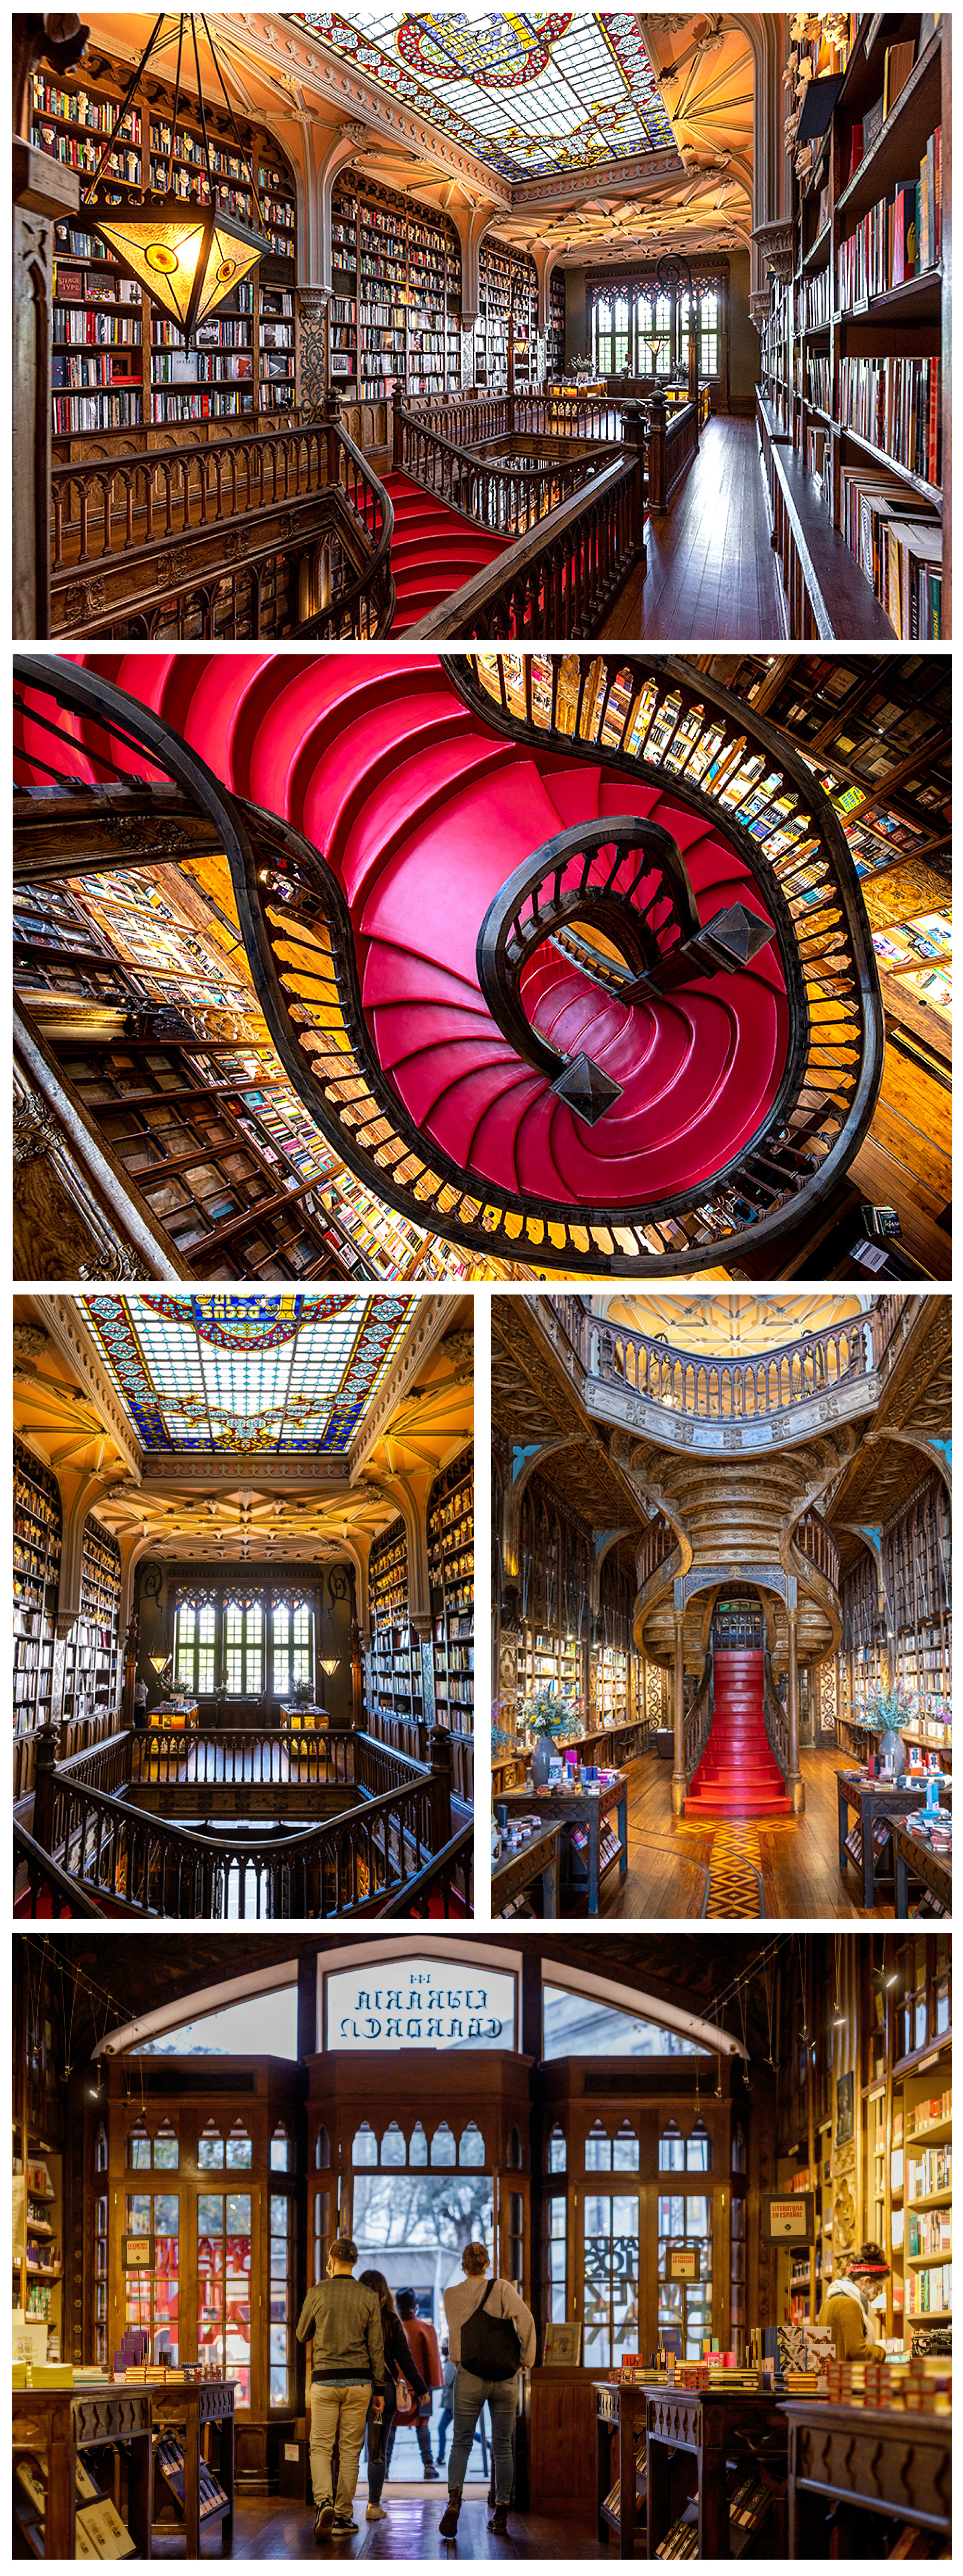 Inside the Livraria Lello in Porto, Portugal, built in 1906 and considered one of the most beautiful bookstores in the world. (Courtesy of Livraria Lello)